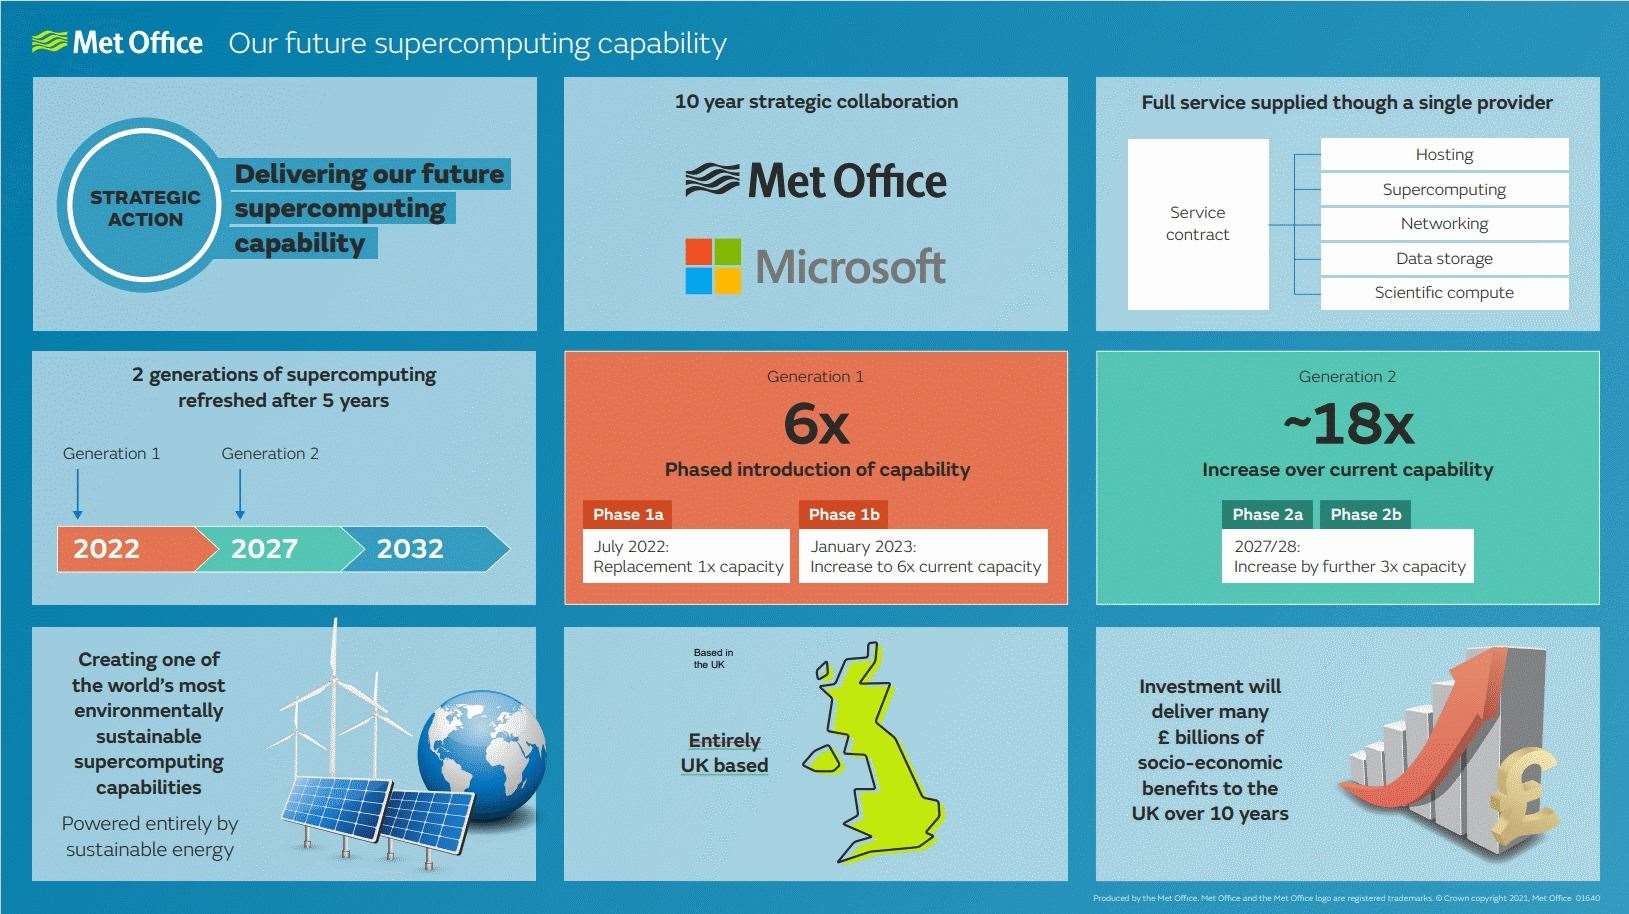 The Met Office will be using one of the top 25 supercomputers in the world when it comes on line next summer.